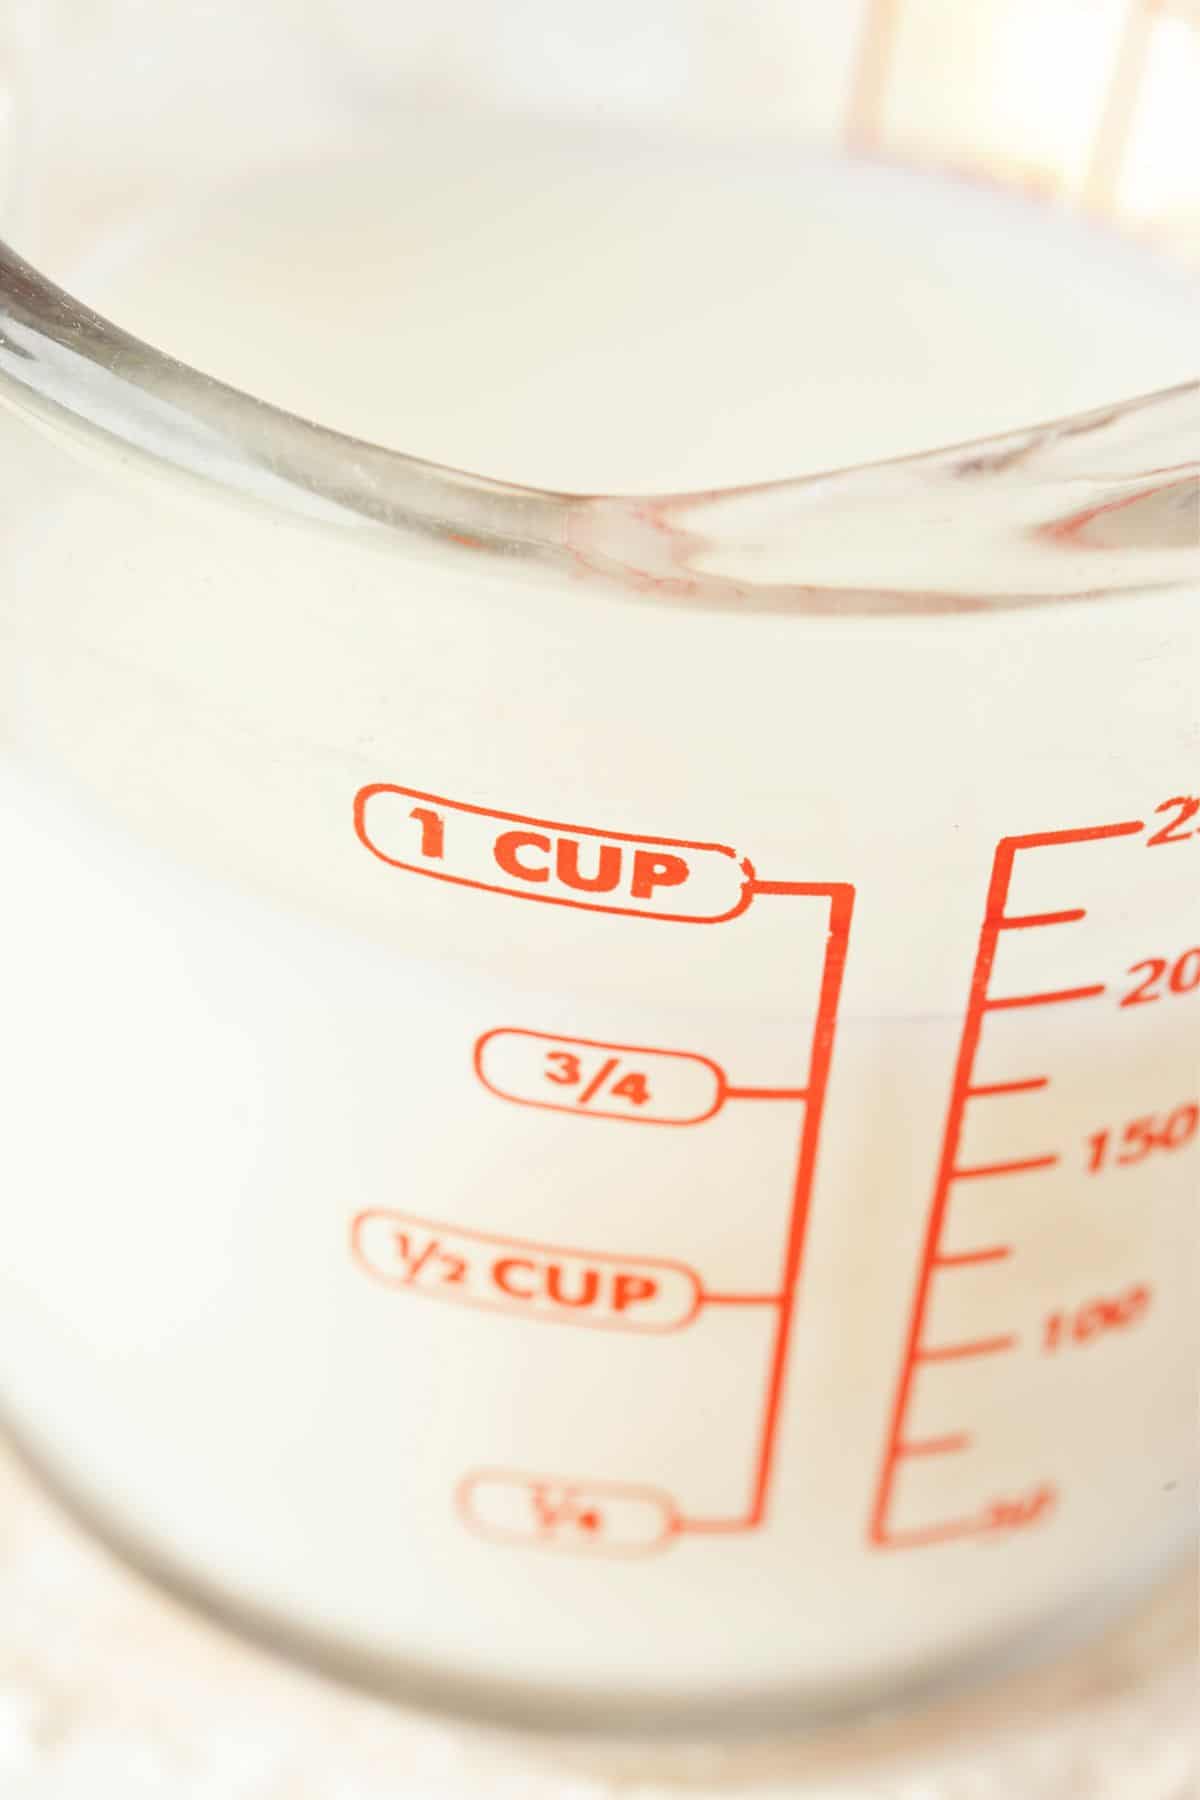 A measuring cup with milk in it an units of measurement on the side